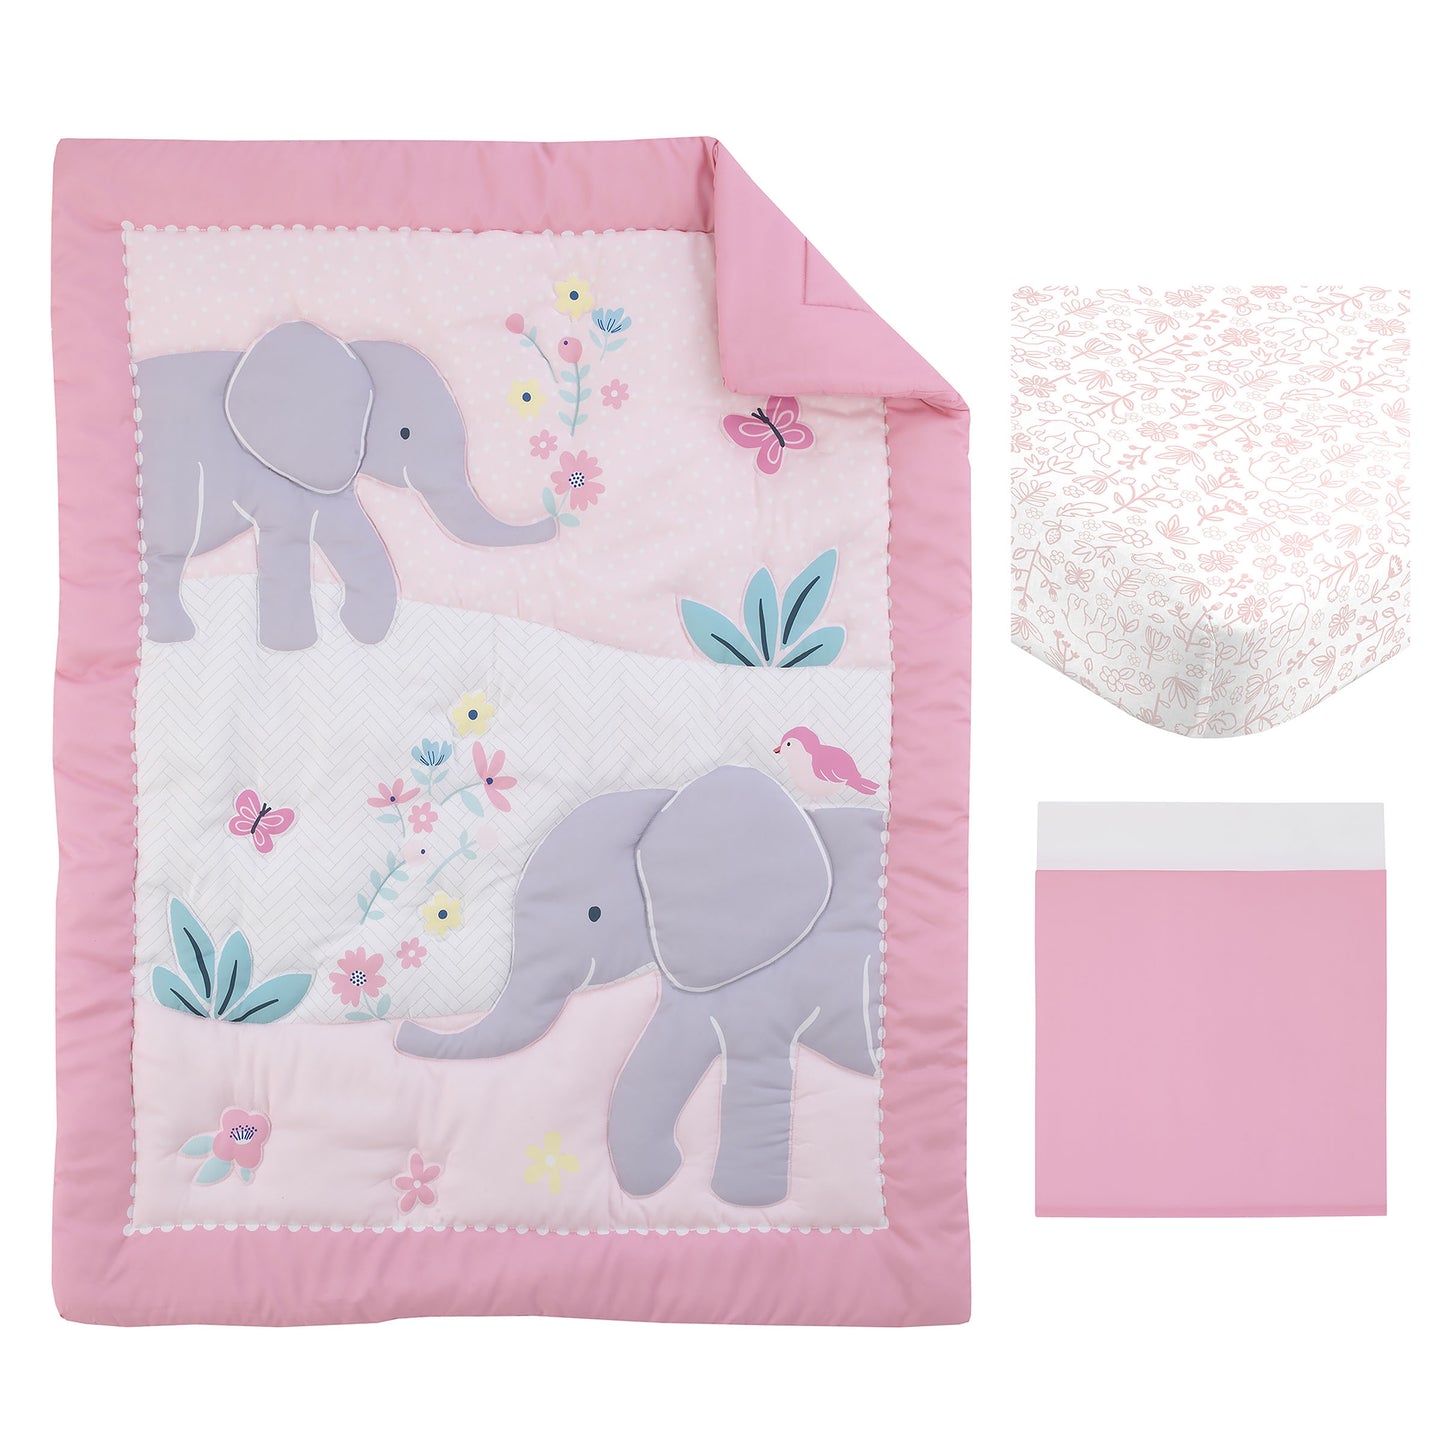 Carter's Floral Elephant Pink and Gray Bird, Butterfly and Flowers 3 Piece Nursery Crib Bedding Set - Comforter, Fitted Crib Sheet, and Crib Skirt